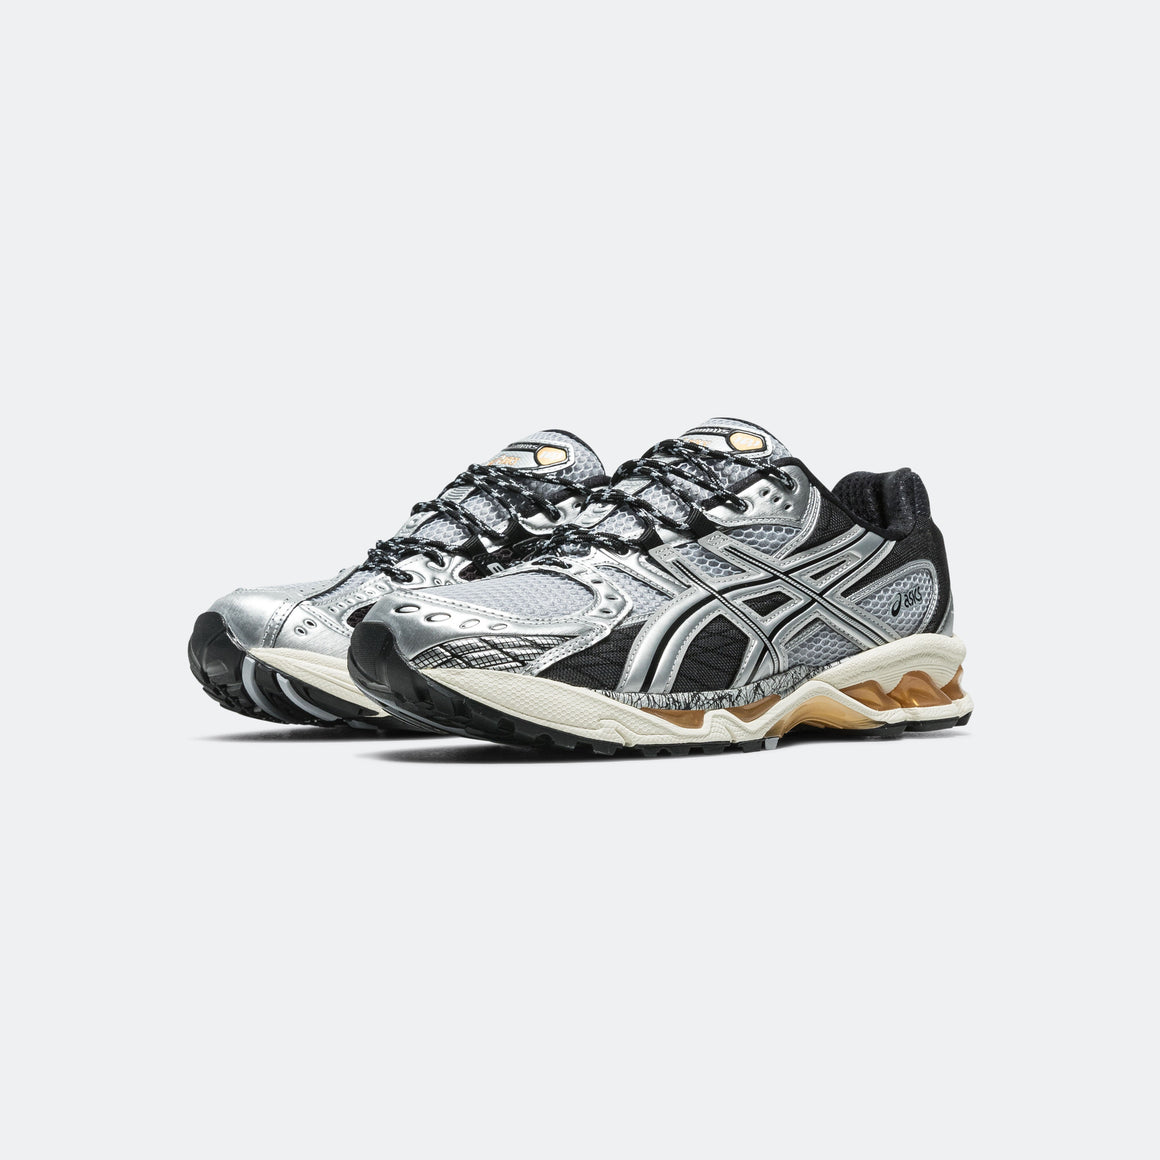 Asics - GEL-Nimbus 10.1 - Piedmont Grey/Pure Silver - UP THERE